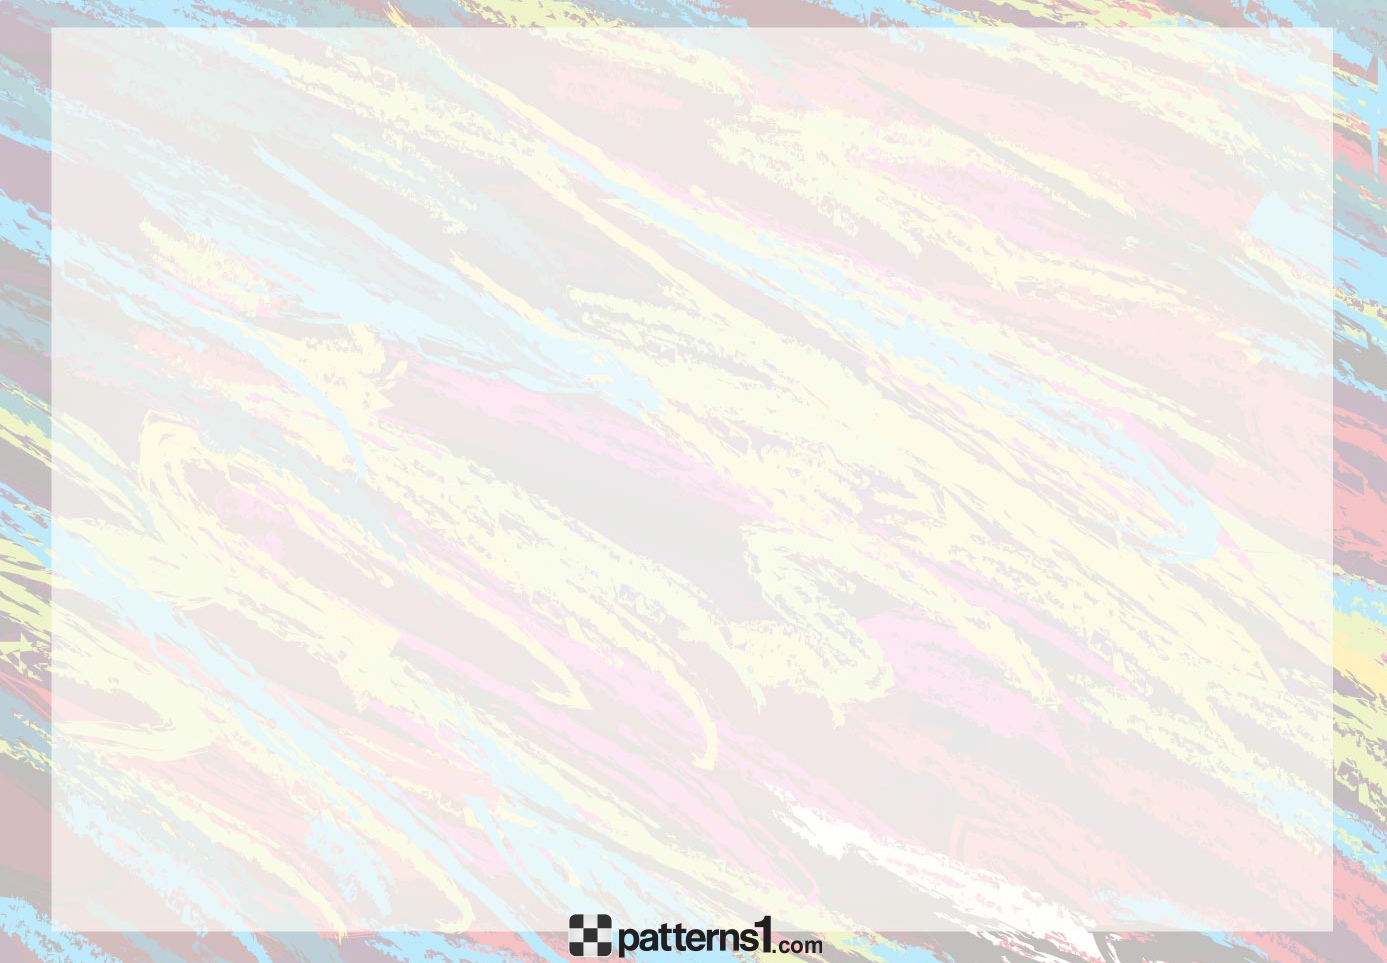 Abstract grunge painted background clipart vector pattern design